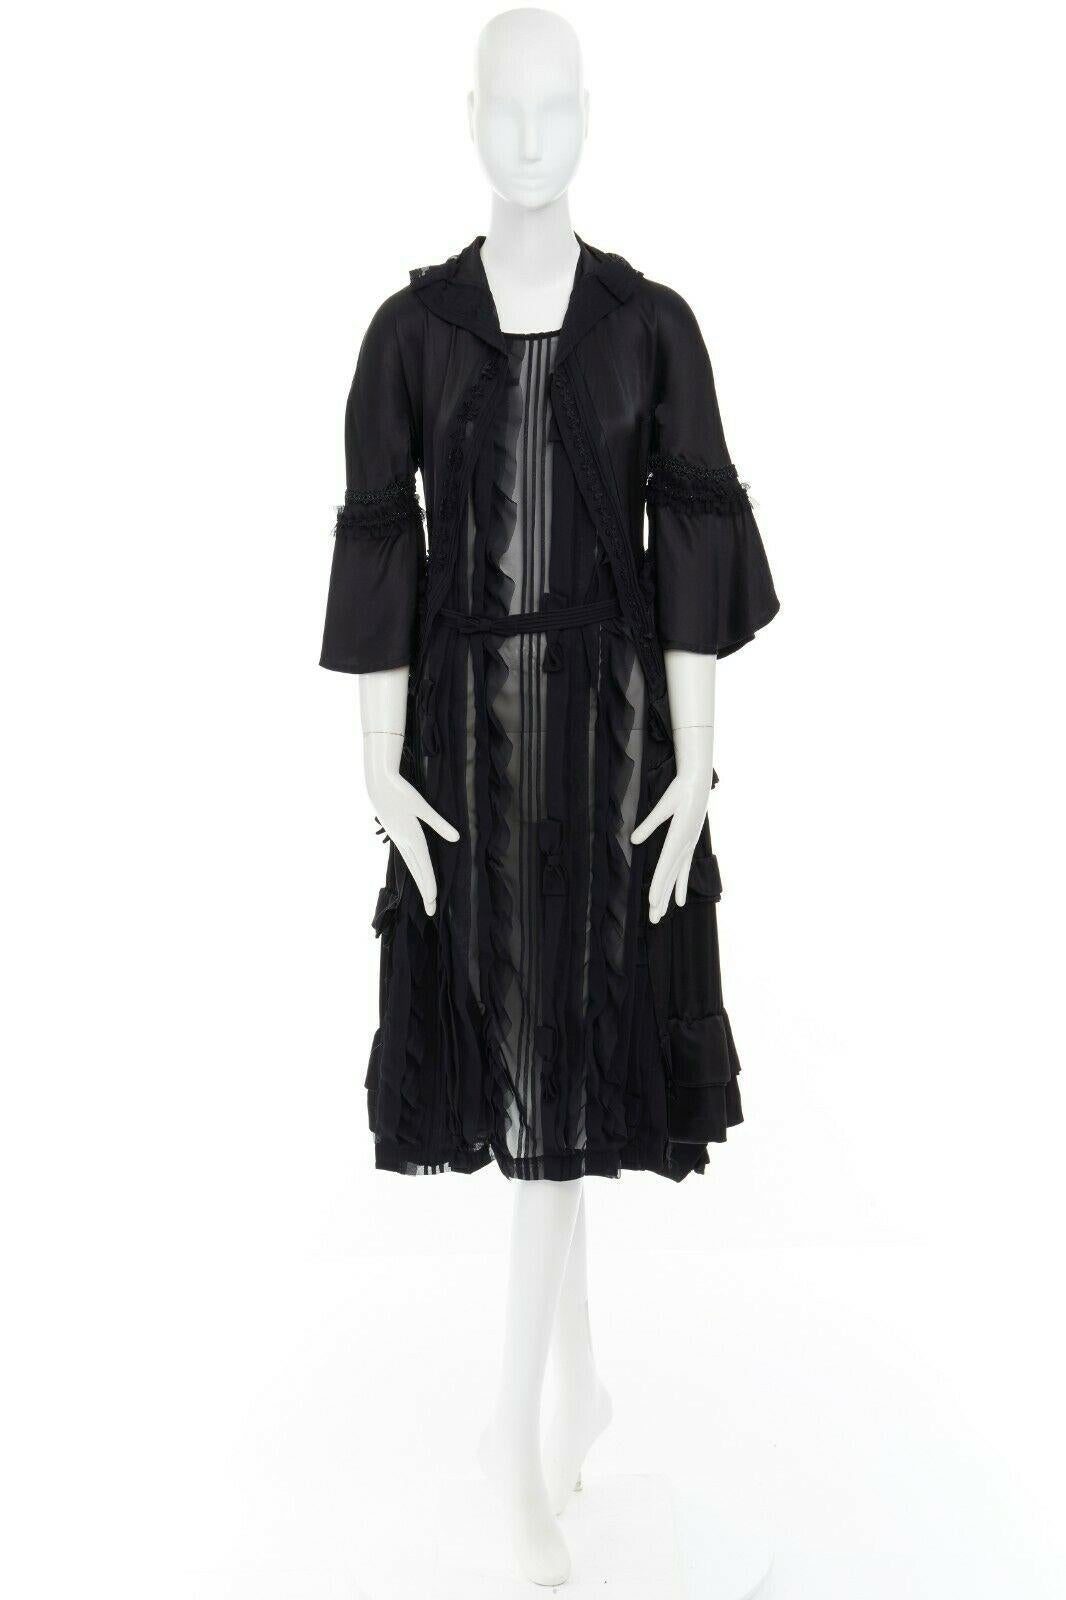 COMME DES GARCONS
From the Fall Winter 'BROKEN BRIDE' 
Collection Silk, polyester • Black • Victorian inspired dress • An illusion of a jacket over dress • Spread collar • 3/4 wide flared victorian sleeves • Grommet and lace trimming on sleeve •